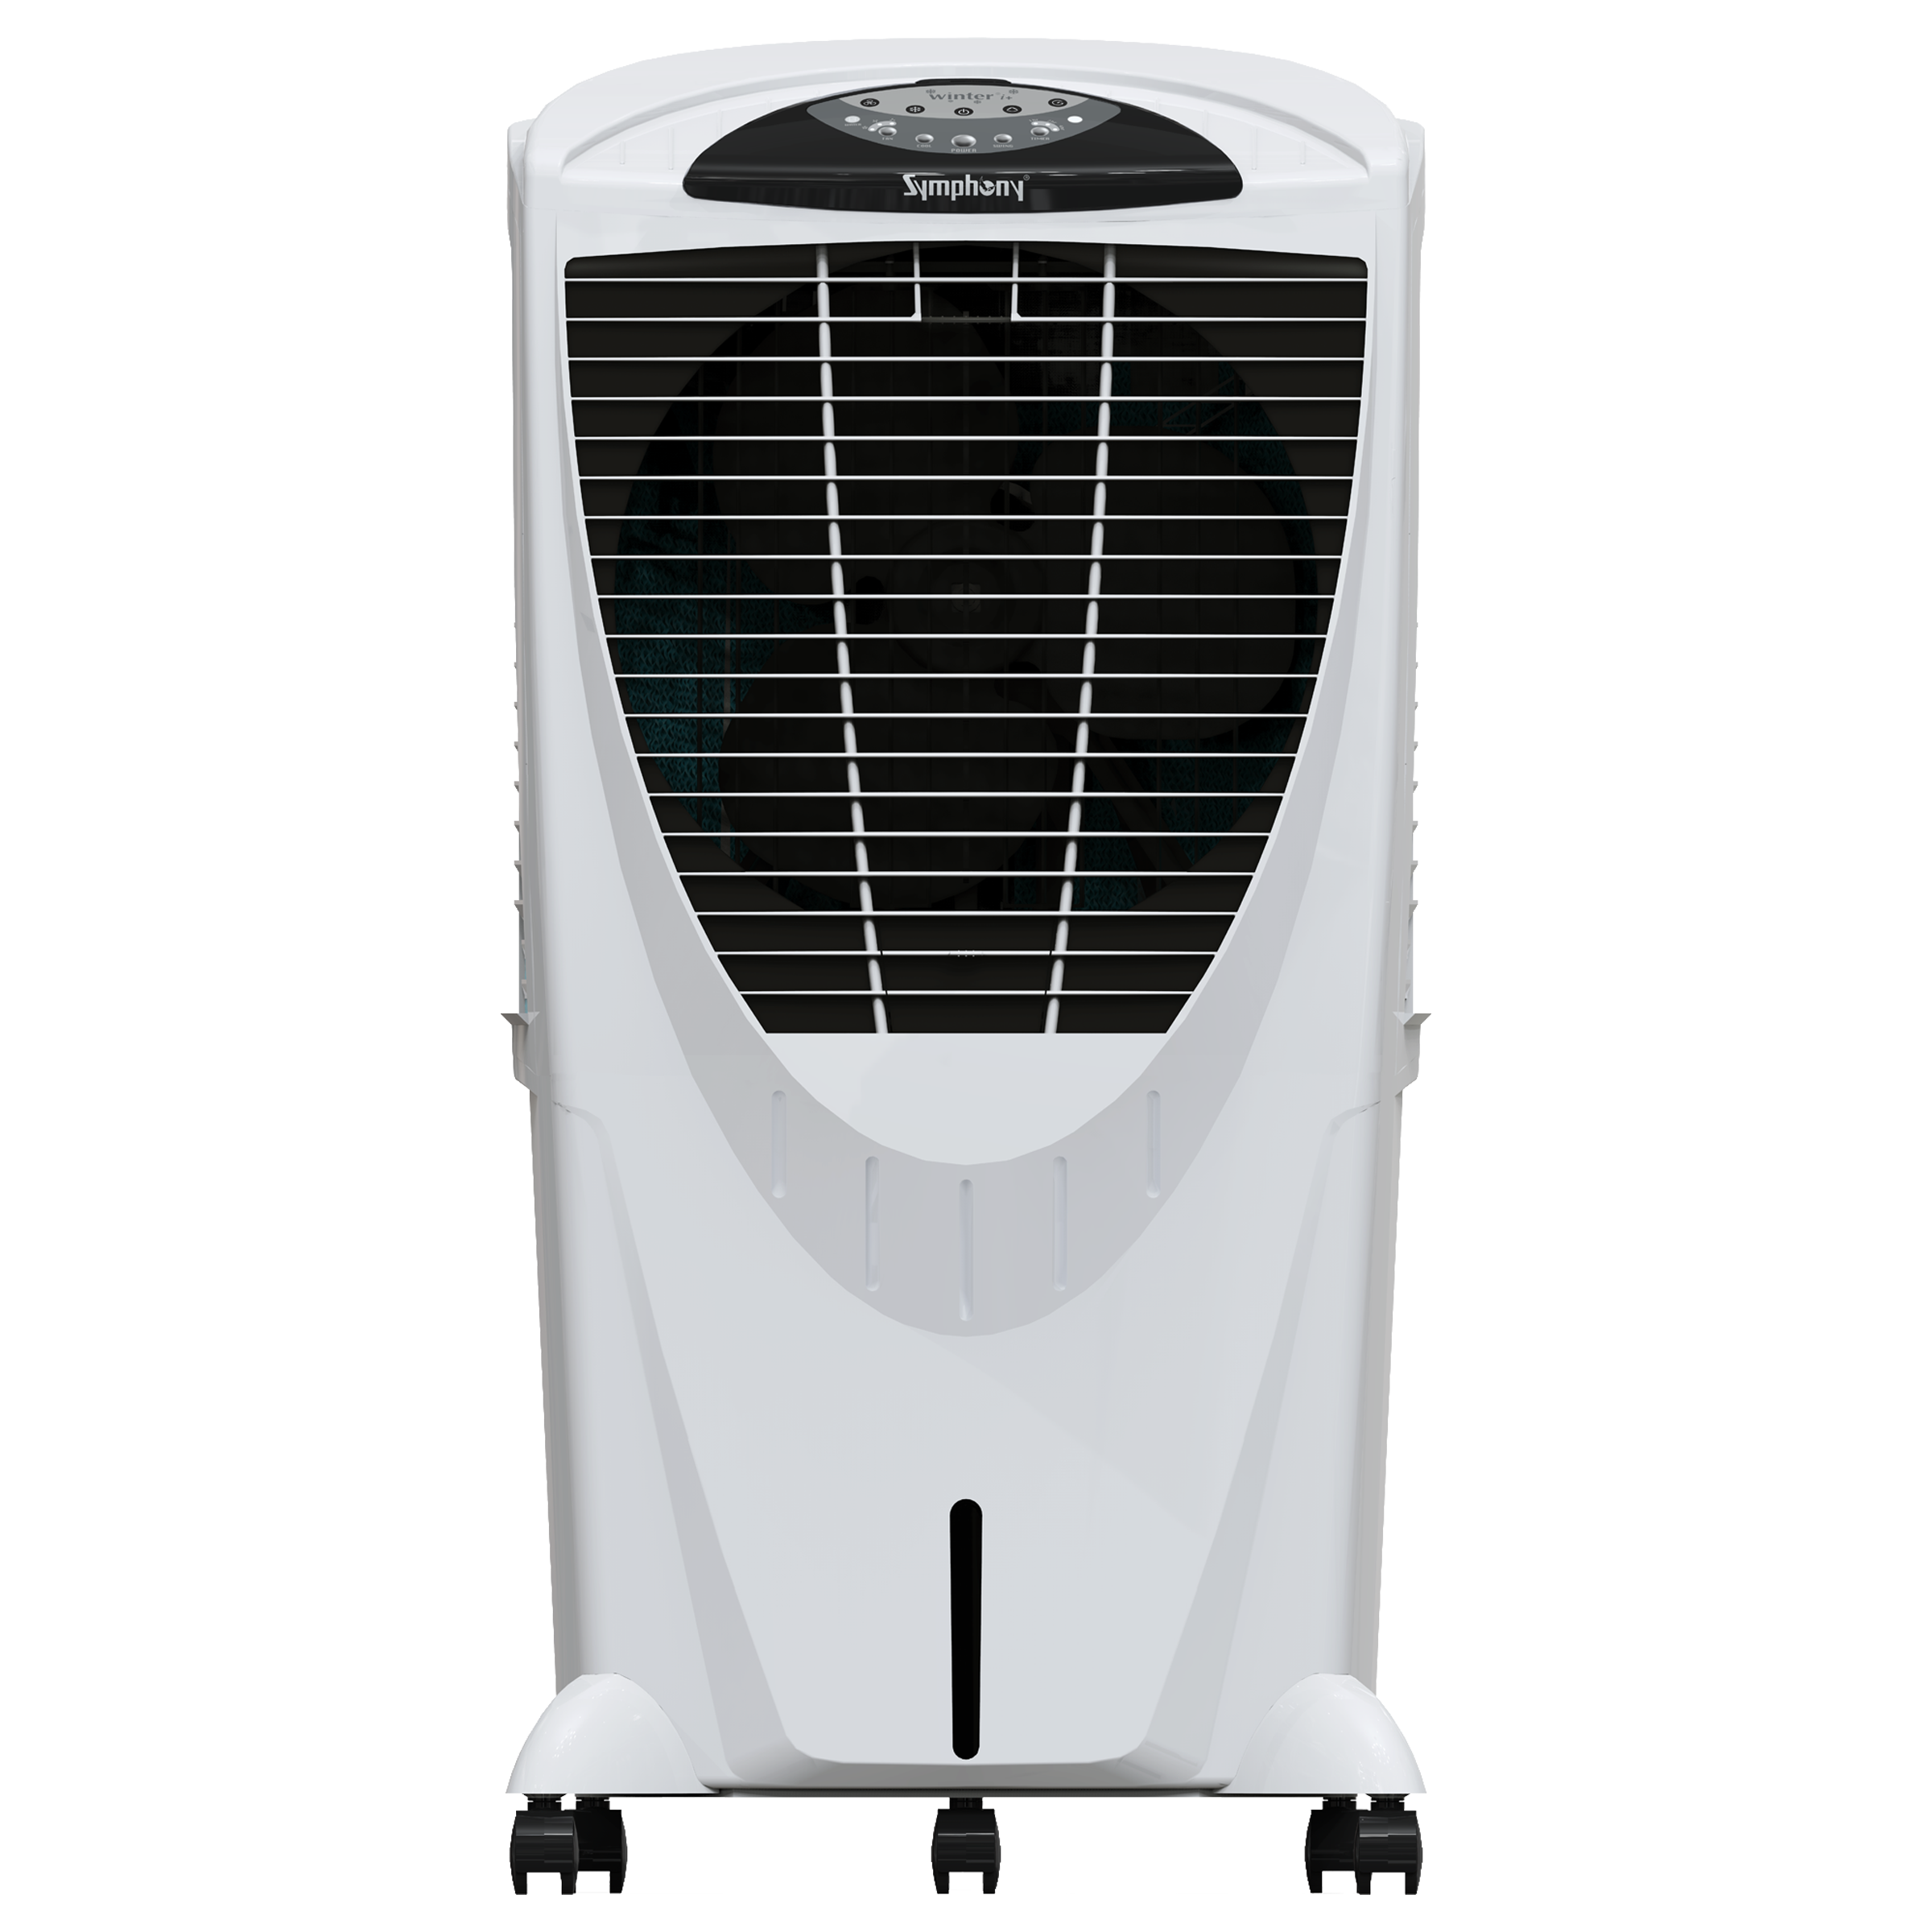 Symphony Winter 80XL i+ 80 Litres Desert Air Cooler with SMPS Technology (Whisper-Quiet Operation, White)